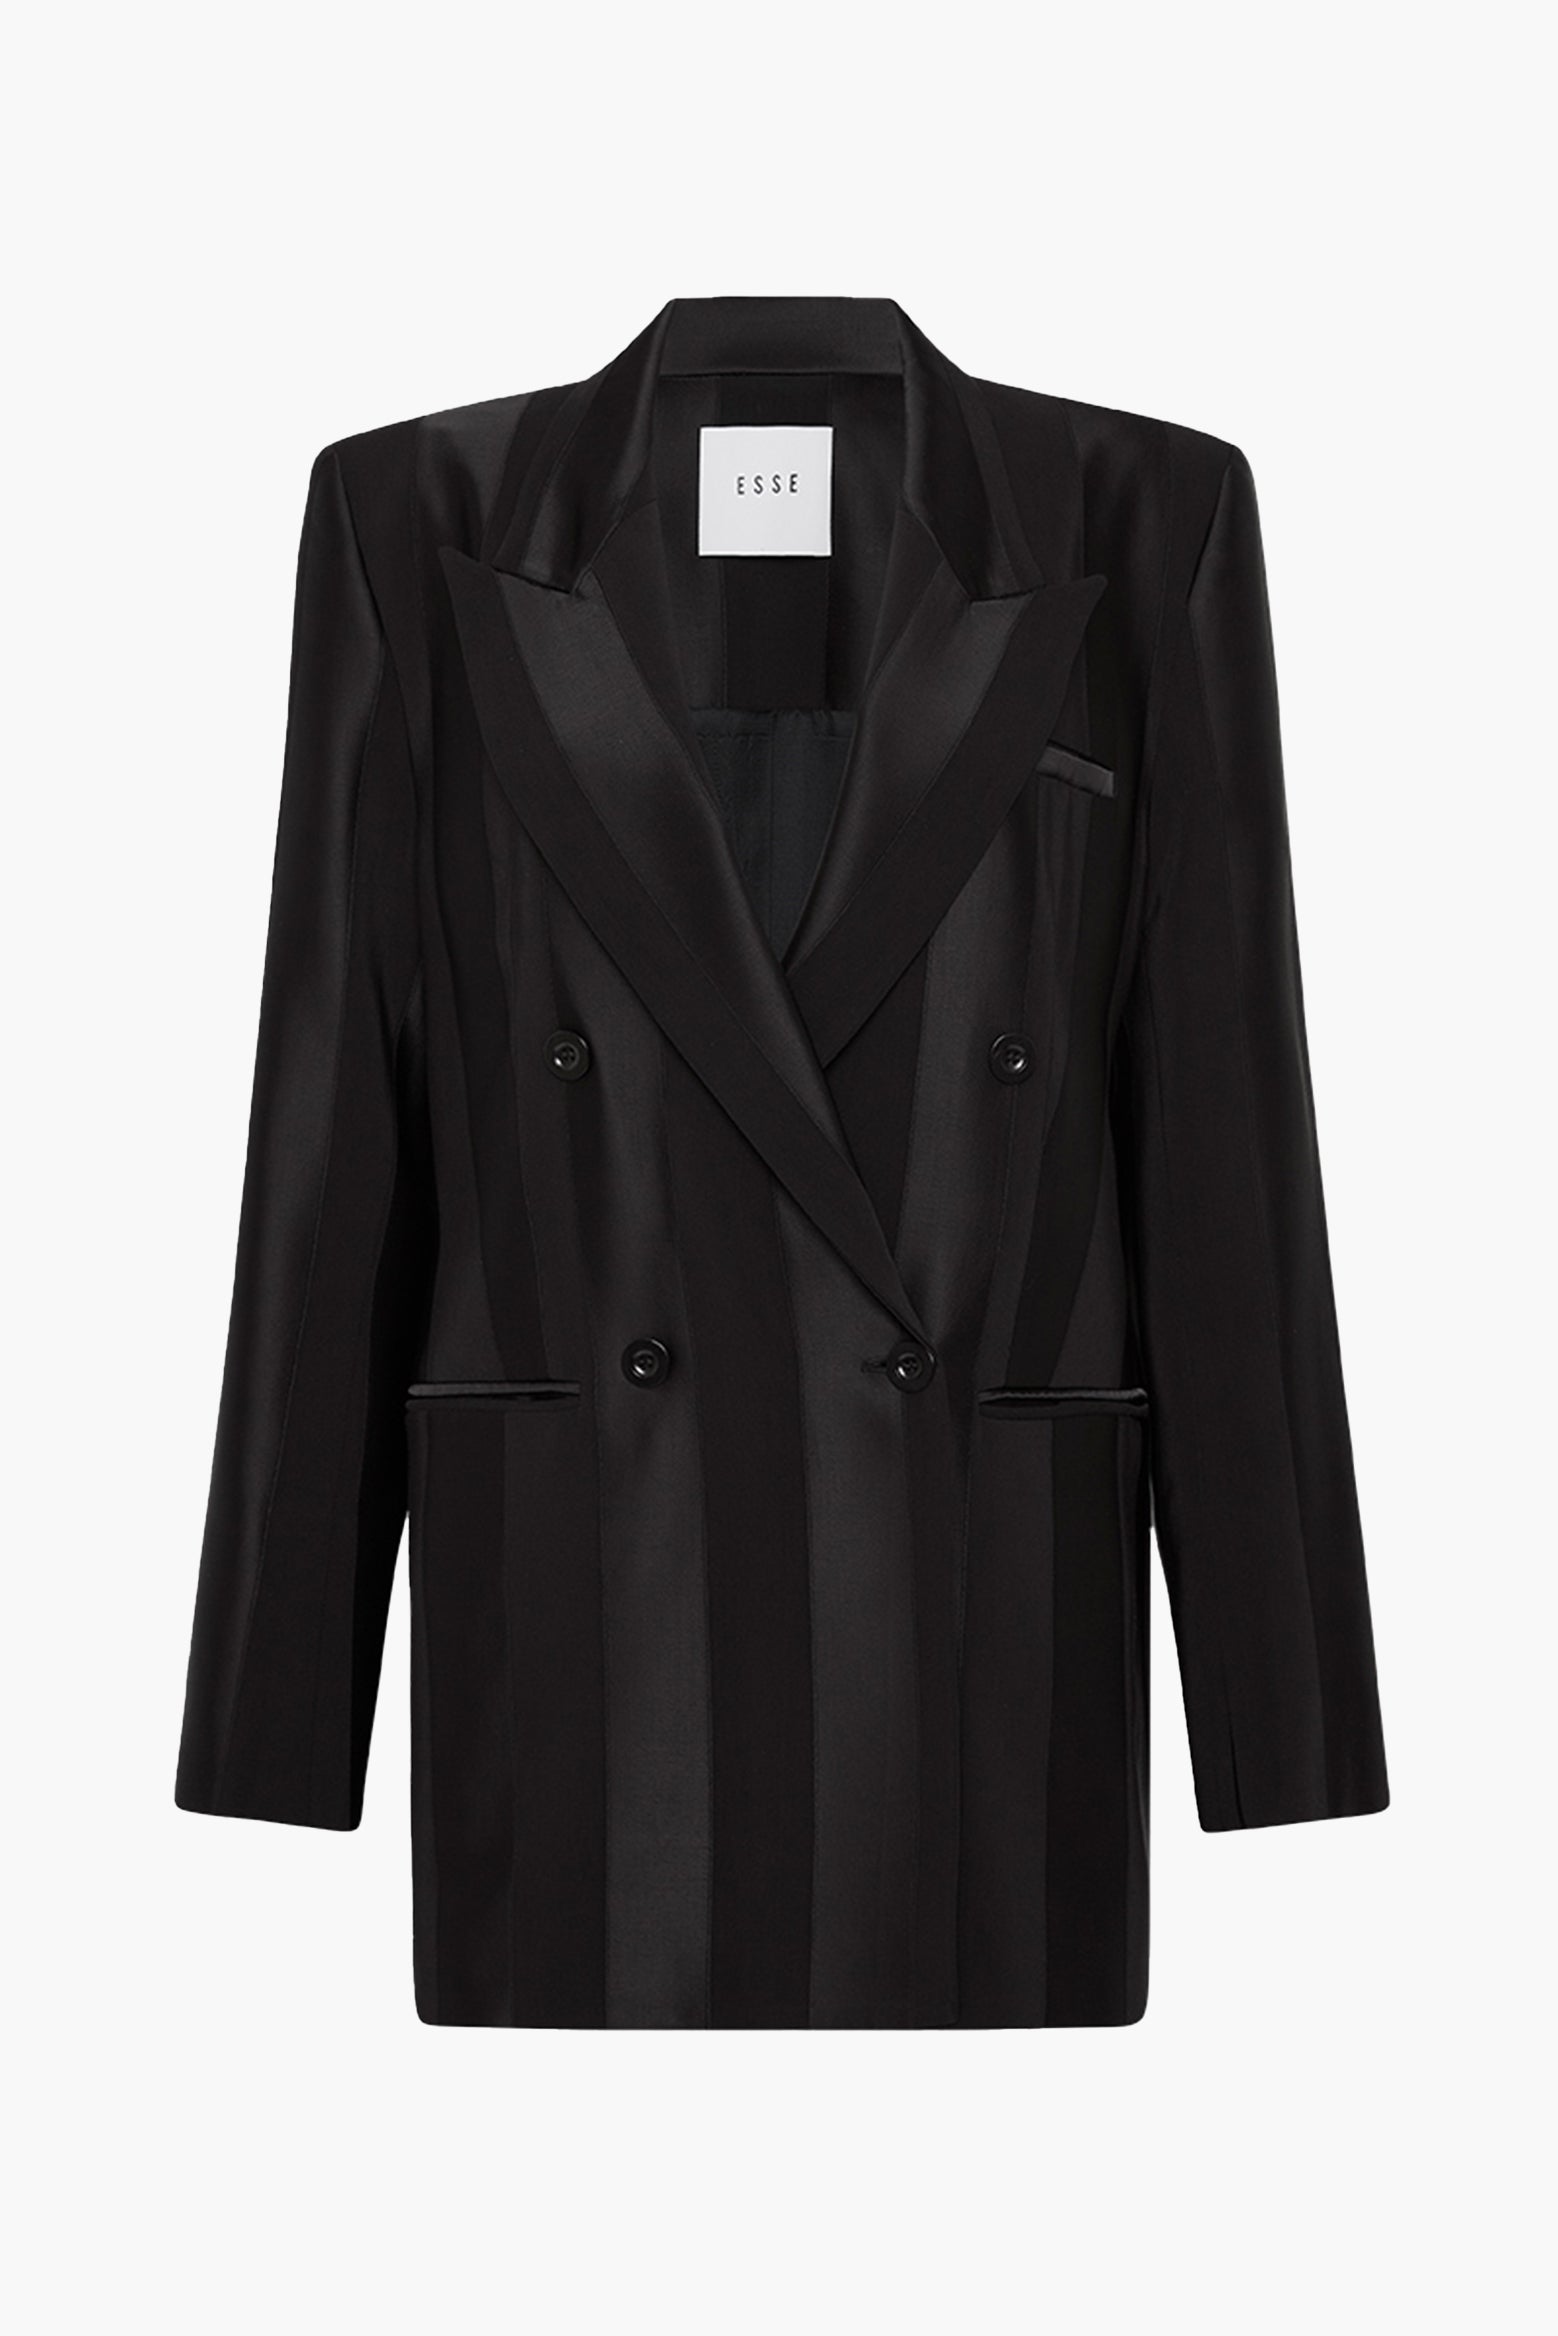 Esse Modus Blazer in Black available at The New Trend Australia.